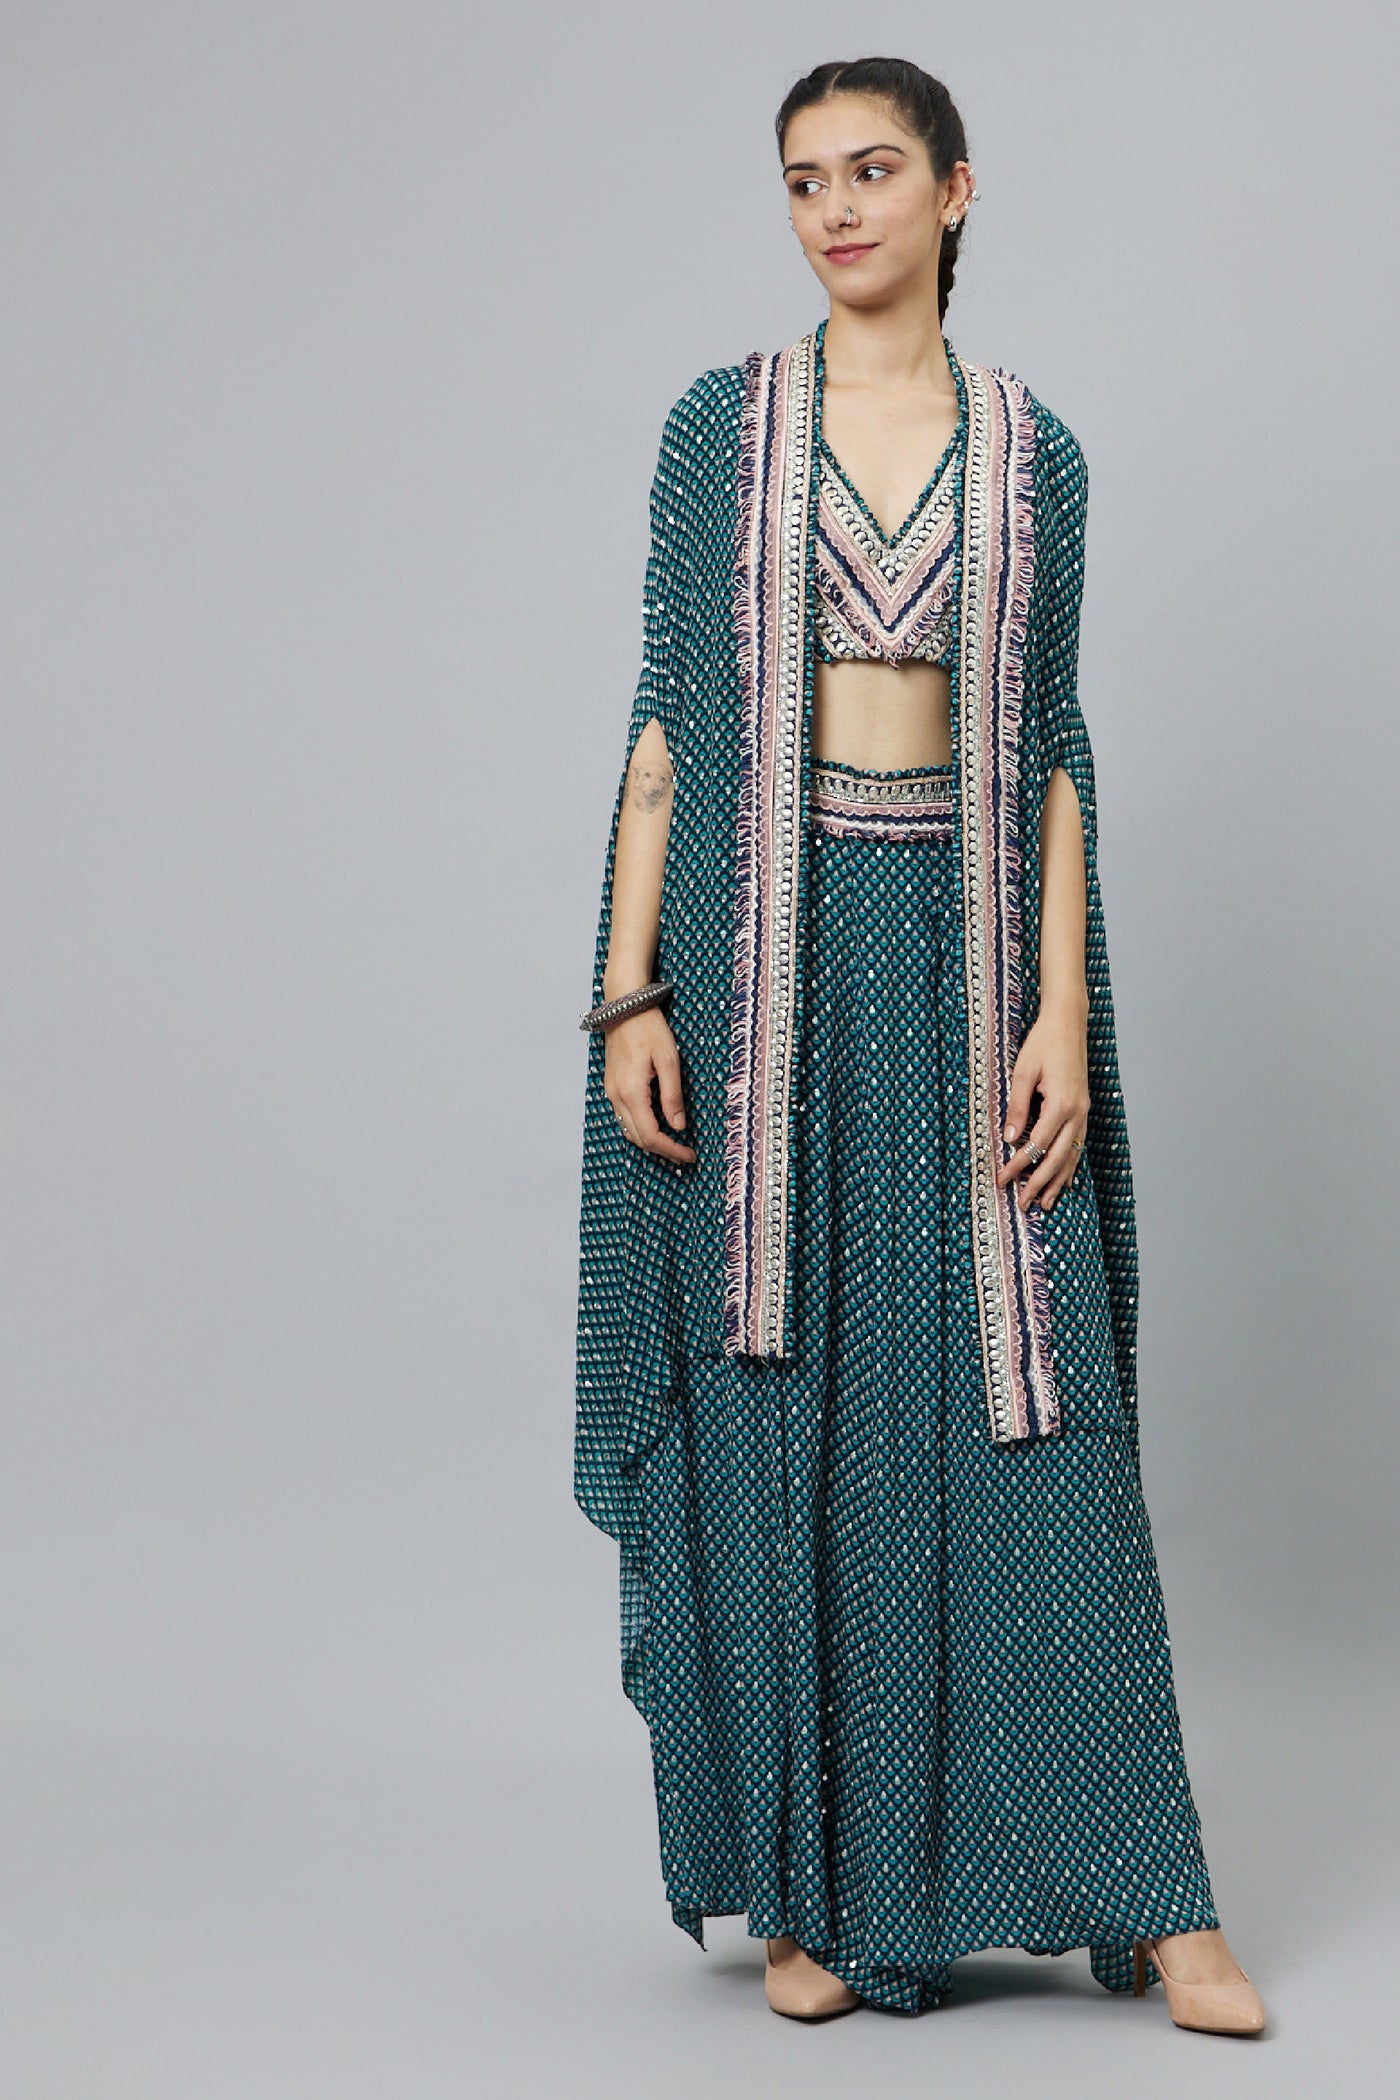 SVA Textured crop top teamed with embellished blue butti print box pleat pants highlighted cape indian designer wear online shopping melange singapore